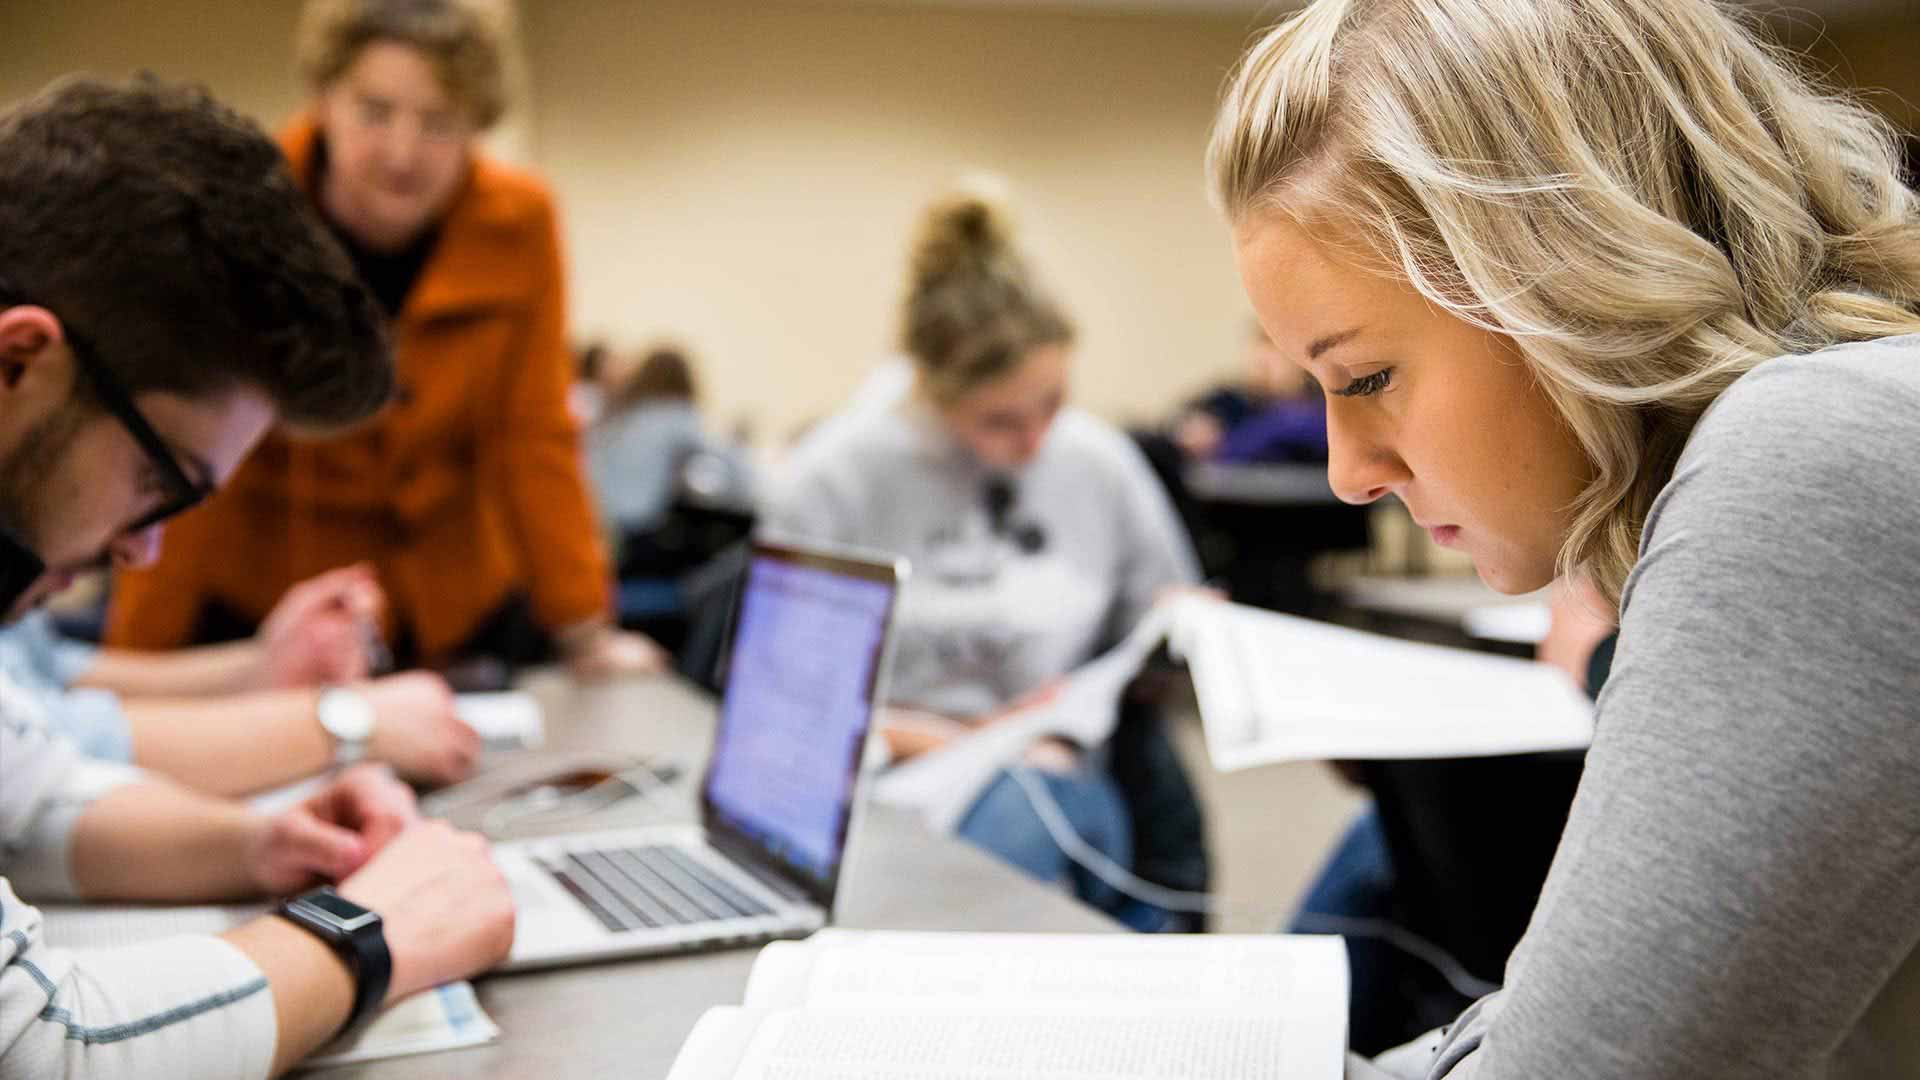 Students study over books in a classroom